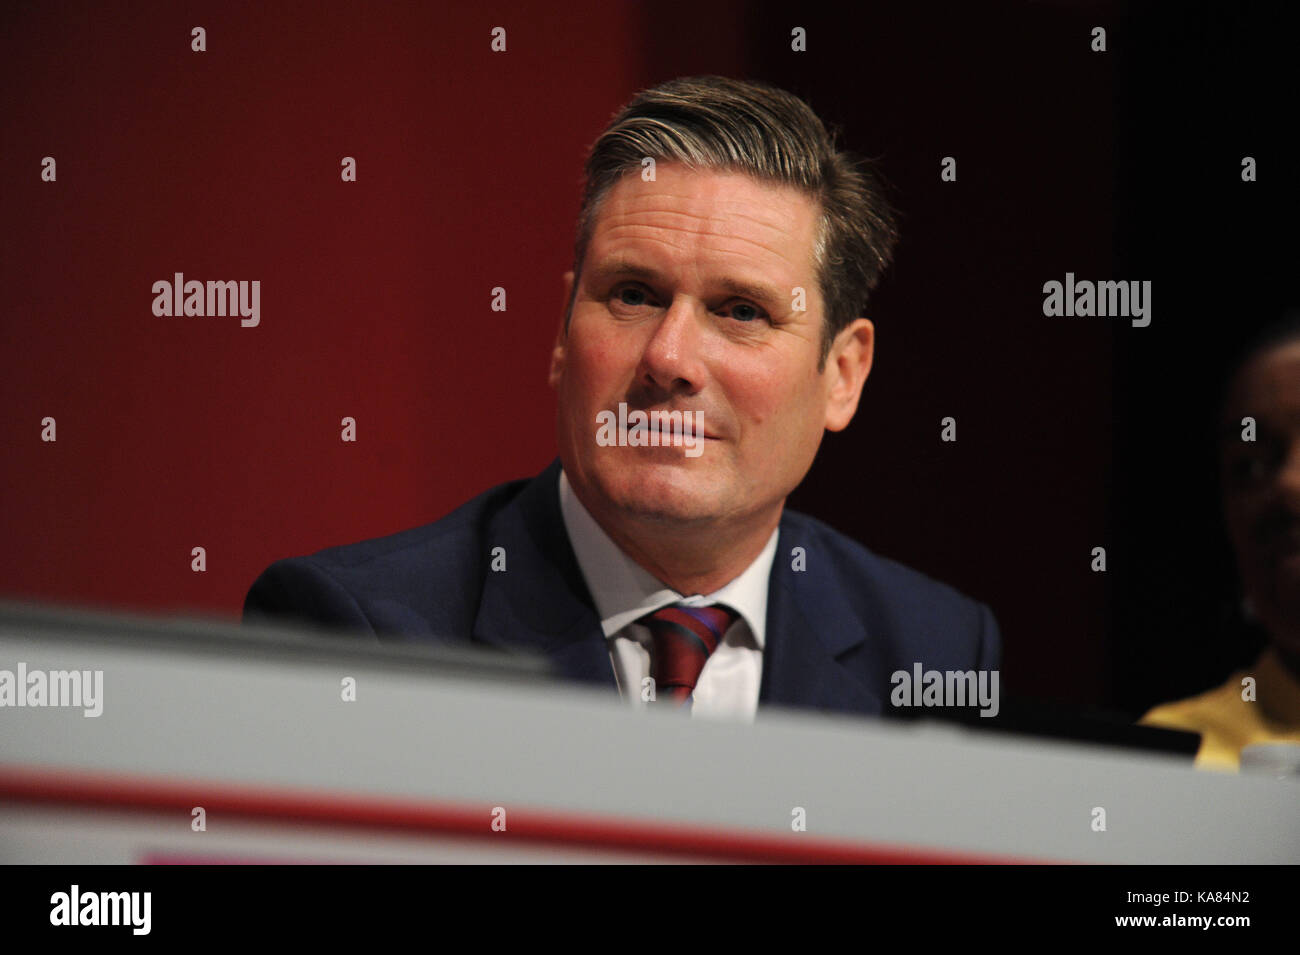 Brighton, UK. 25th Sep, 2017. Keir Starmer, Shadow Secretary of State for Exiting the European Union, on the platform at the morning session of the second day of the Labour Party annual conference at the Brighton Centre. This conference is following the general election of June 2017, when under the leadership of Jeremy Corbyn, the Labour Party reduced the Conservative Party majority in parliament resulting in a hung parliament. Credit: Kevin Hayes/Alamy Live News Stock Photo